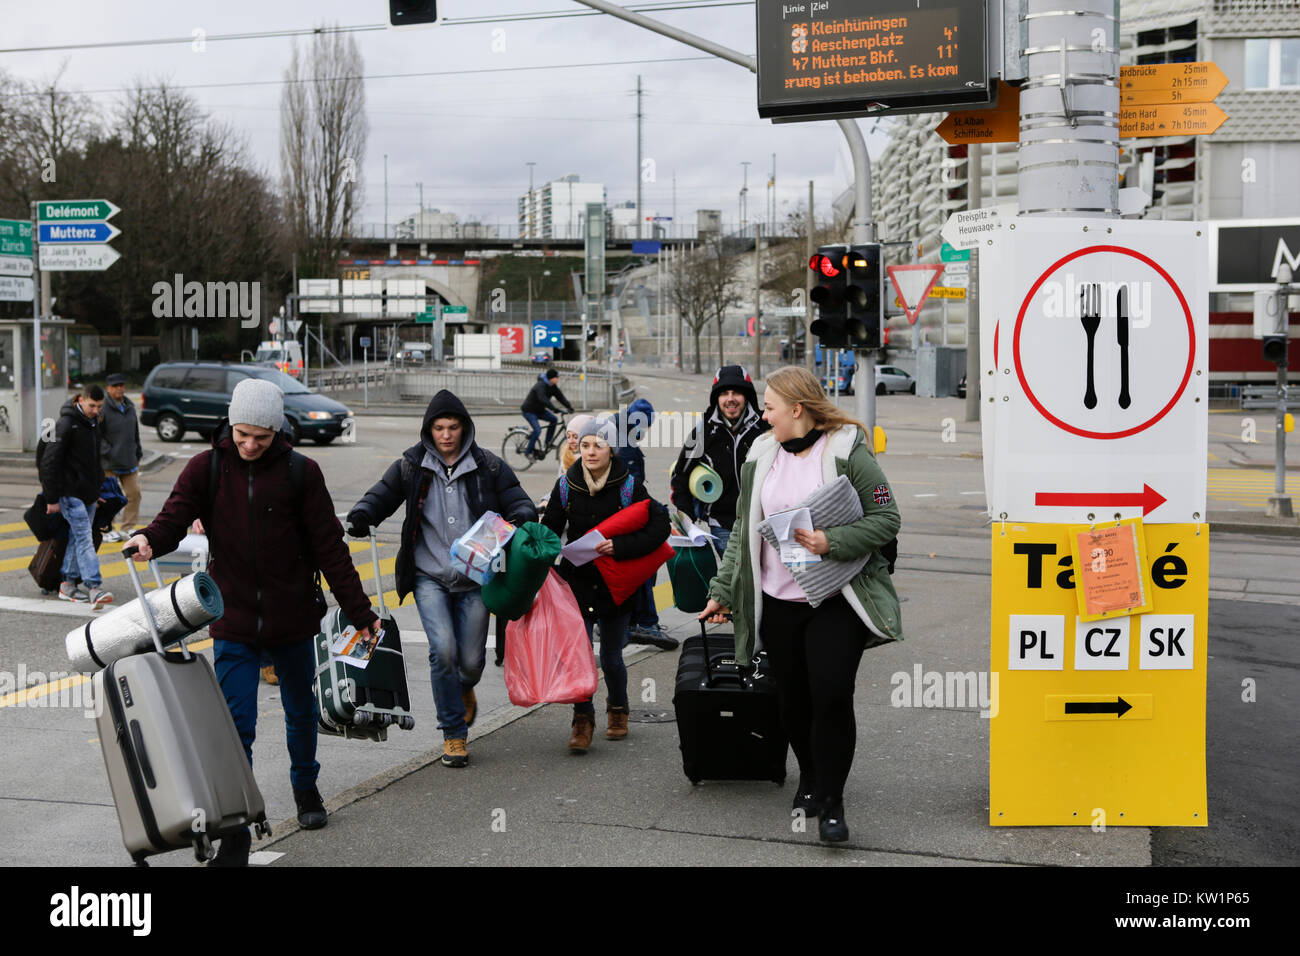 Basel, Switzerland. 28th Dec, 2017. Pilgrims rush to catch the bus, to go to their host parishes. Several thousand young pilgrims from all over Europe and beyond arrived in Basel in Switzerland for the annual European Youth Meeting of the ecumenical Taize community. The meeting of prayers and meditation is held under the motto 'Pilgrimage of Trust on Earth' and is the 40th anniversary meeting. Credit: Michael Debets/Alamy Live News Stock Photo